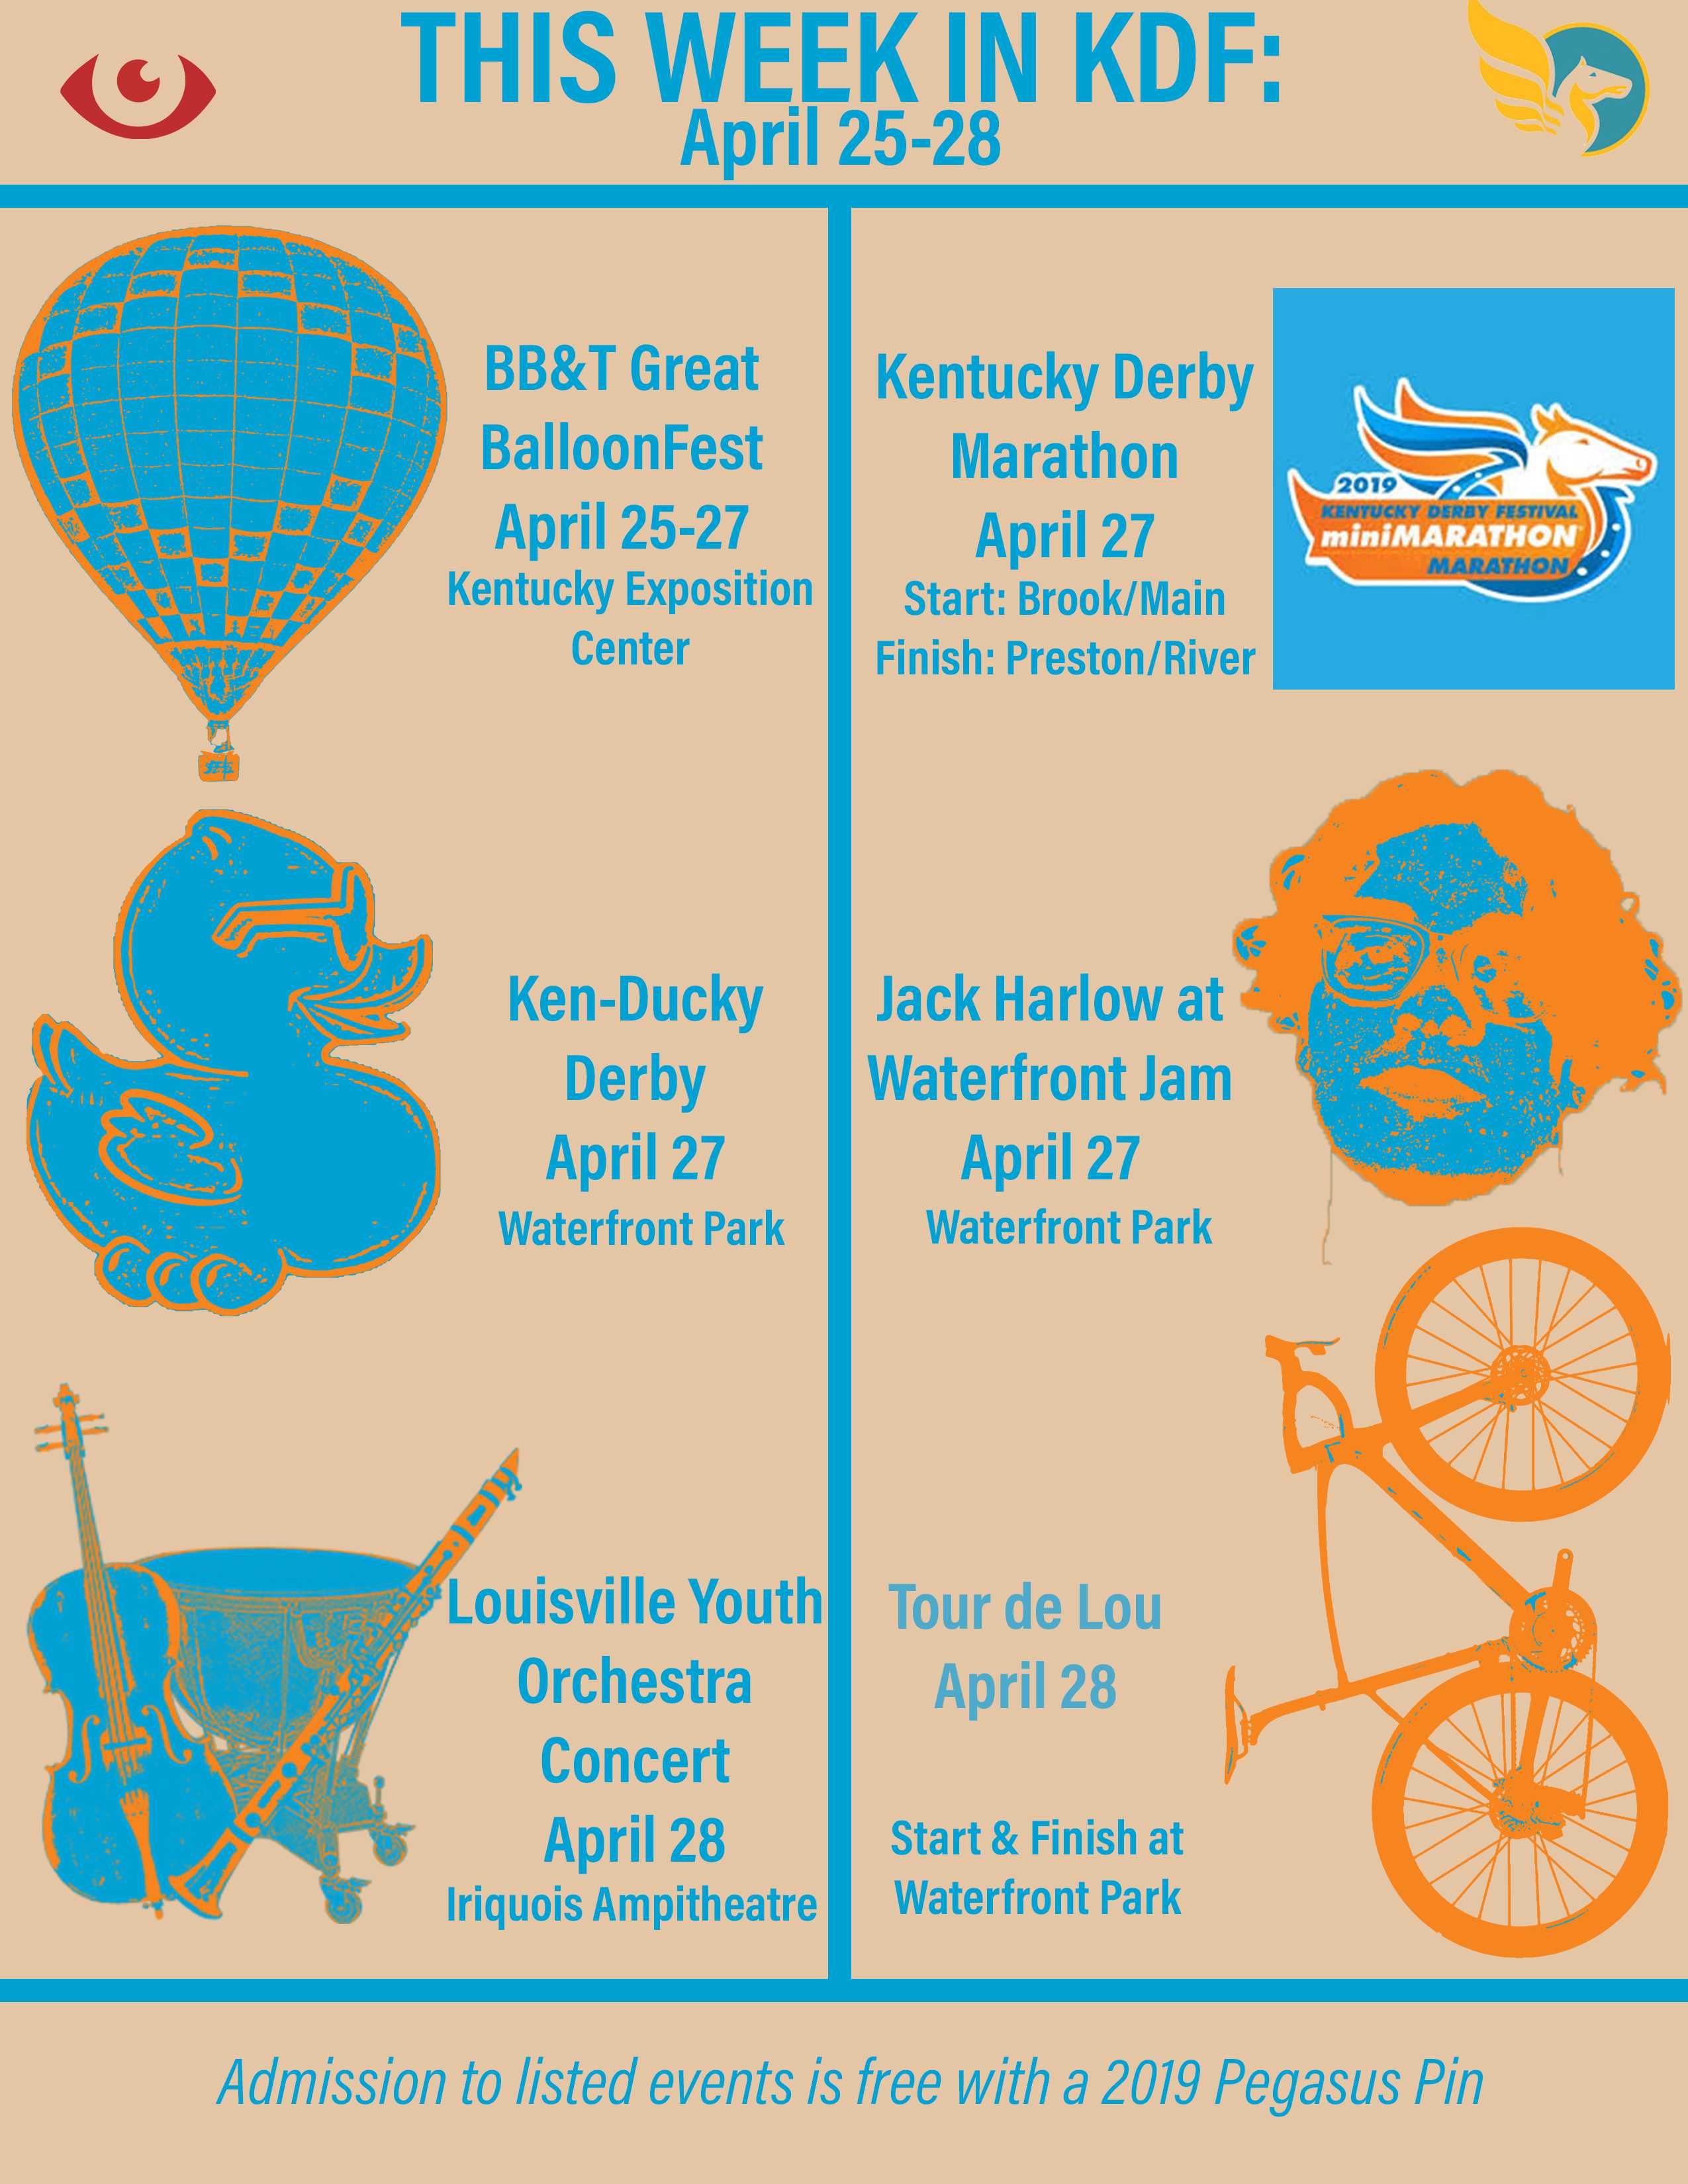 This week in the Kentucky Derby Festival